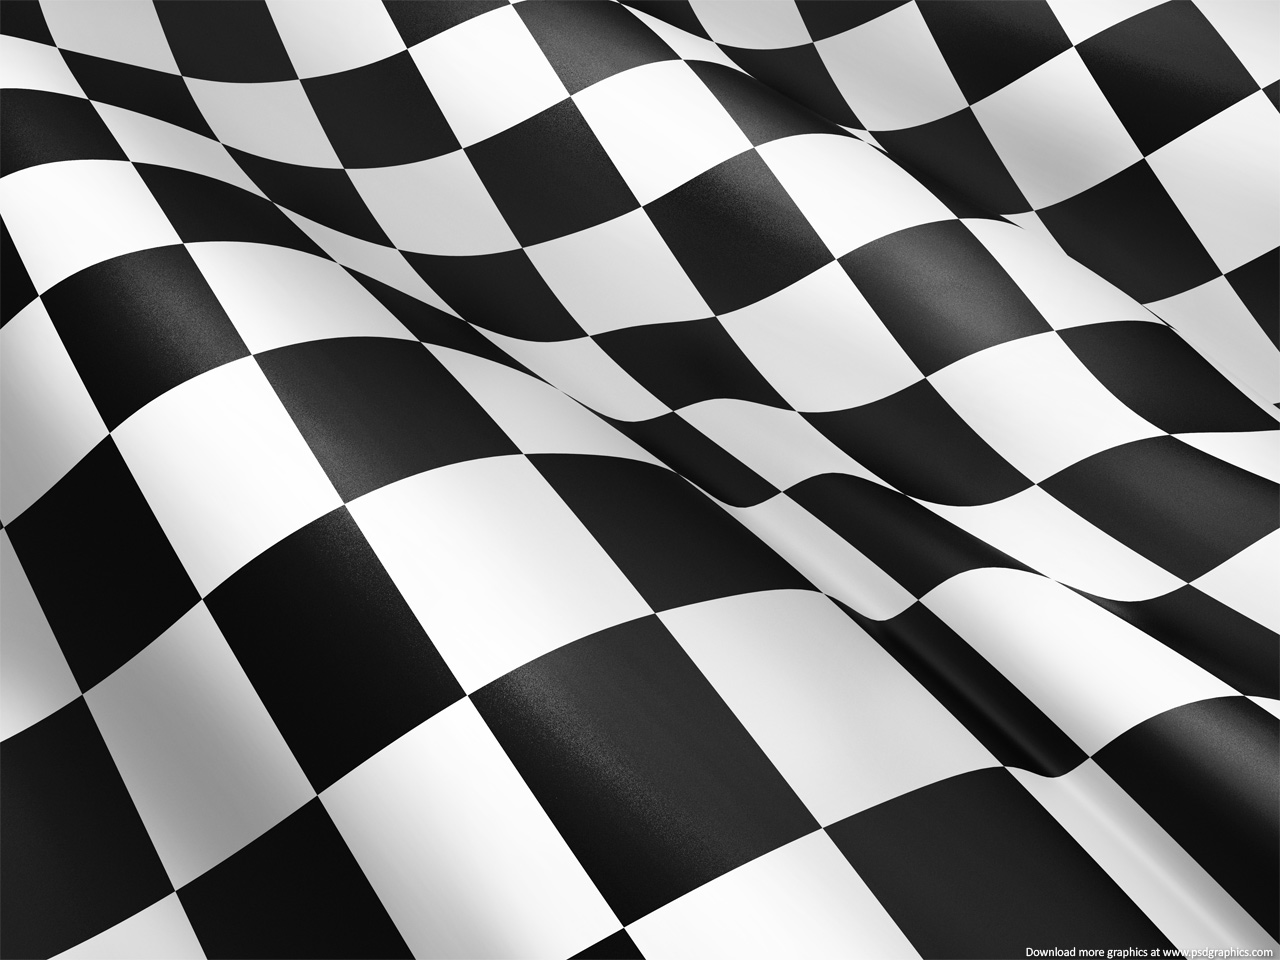 Medium size preview 1280x960px Checkered flag background